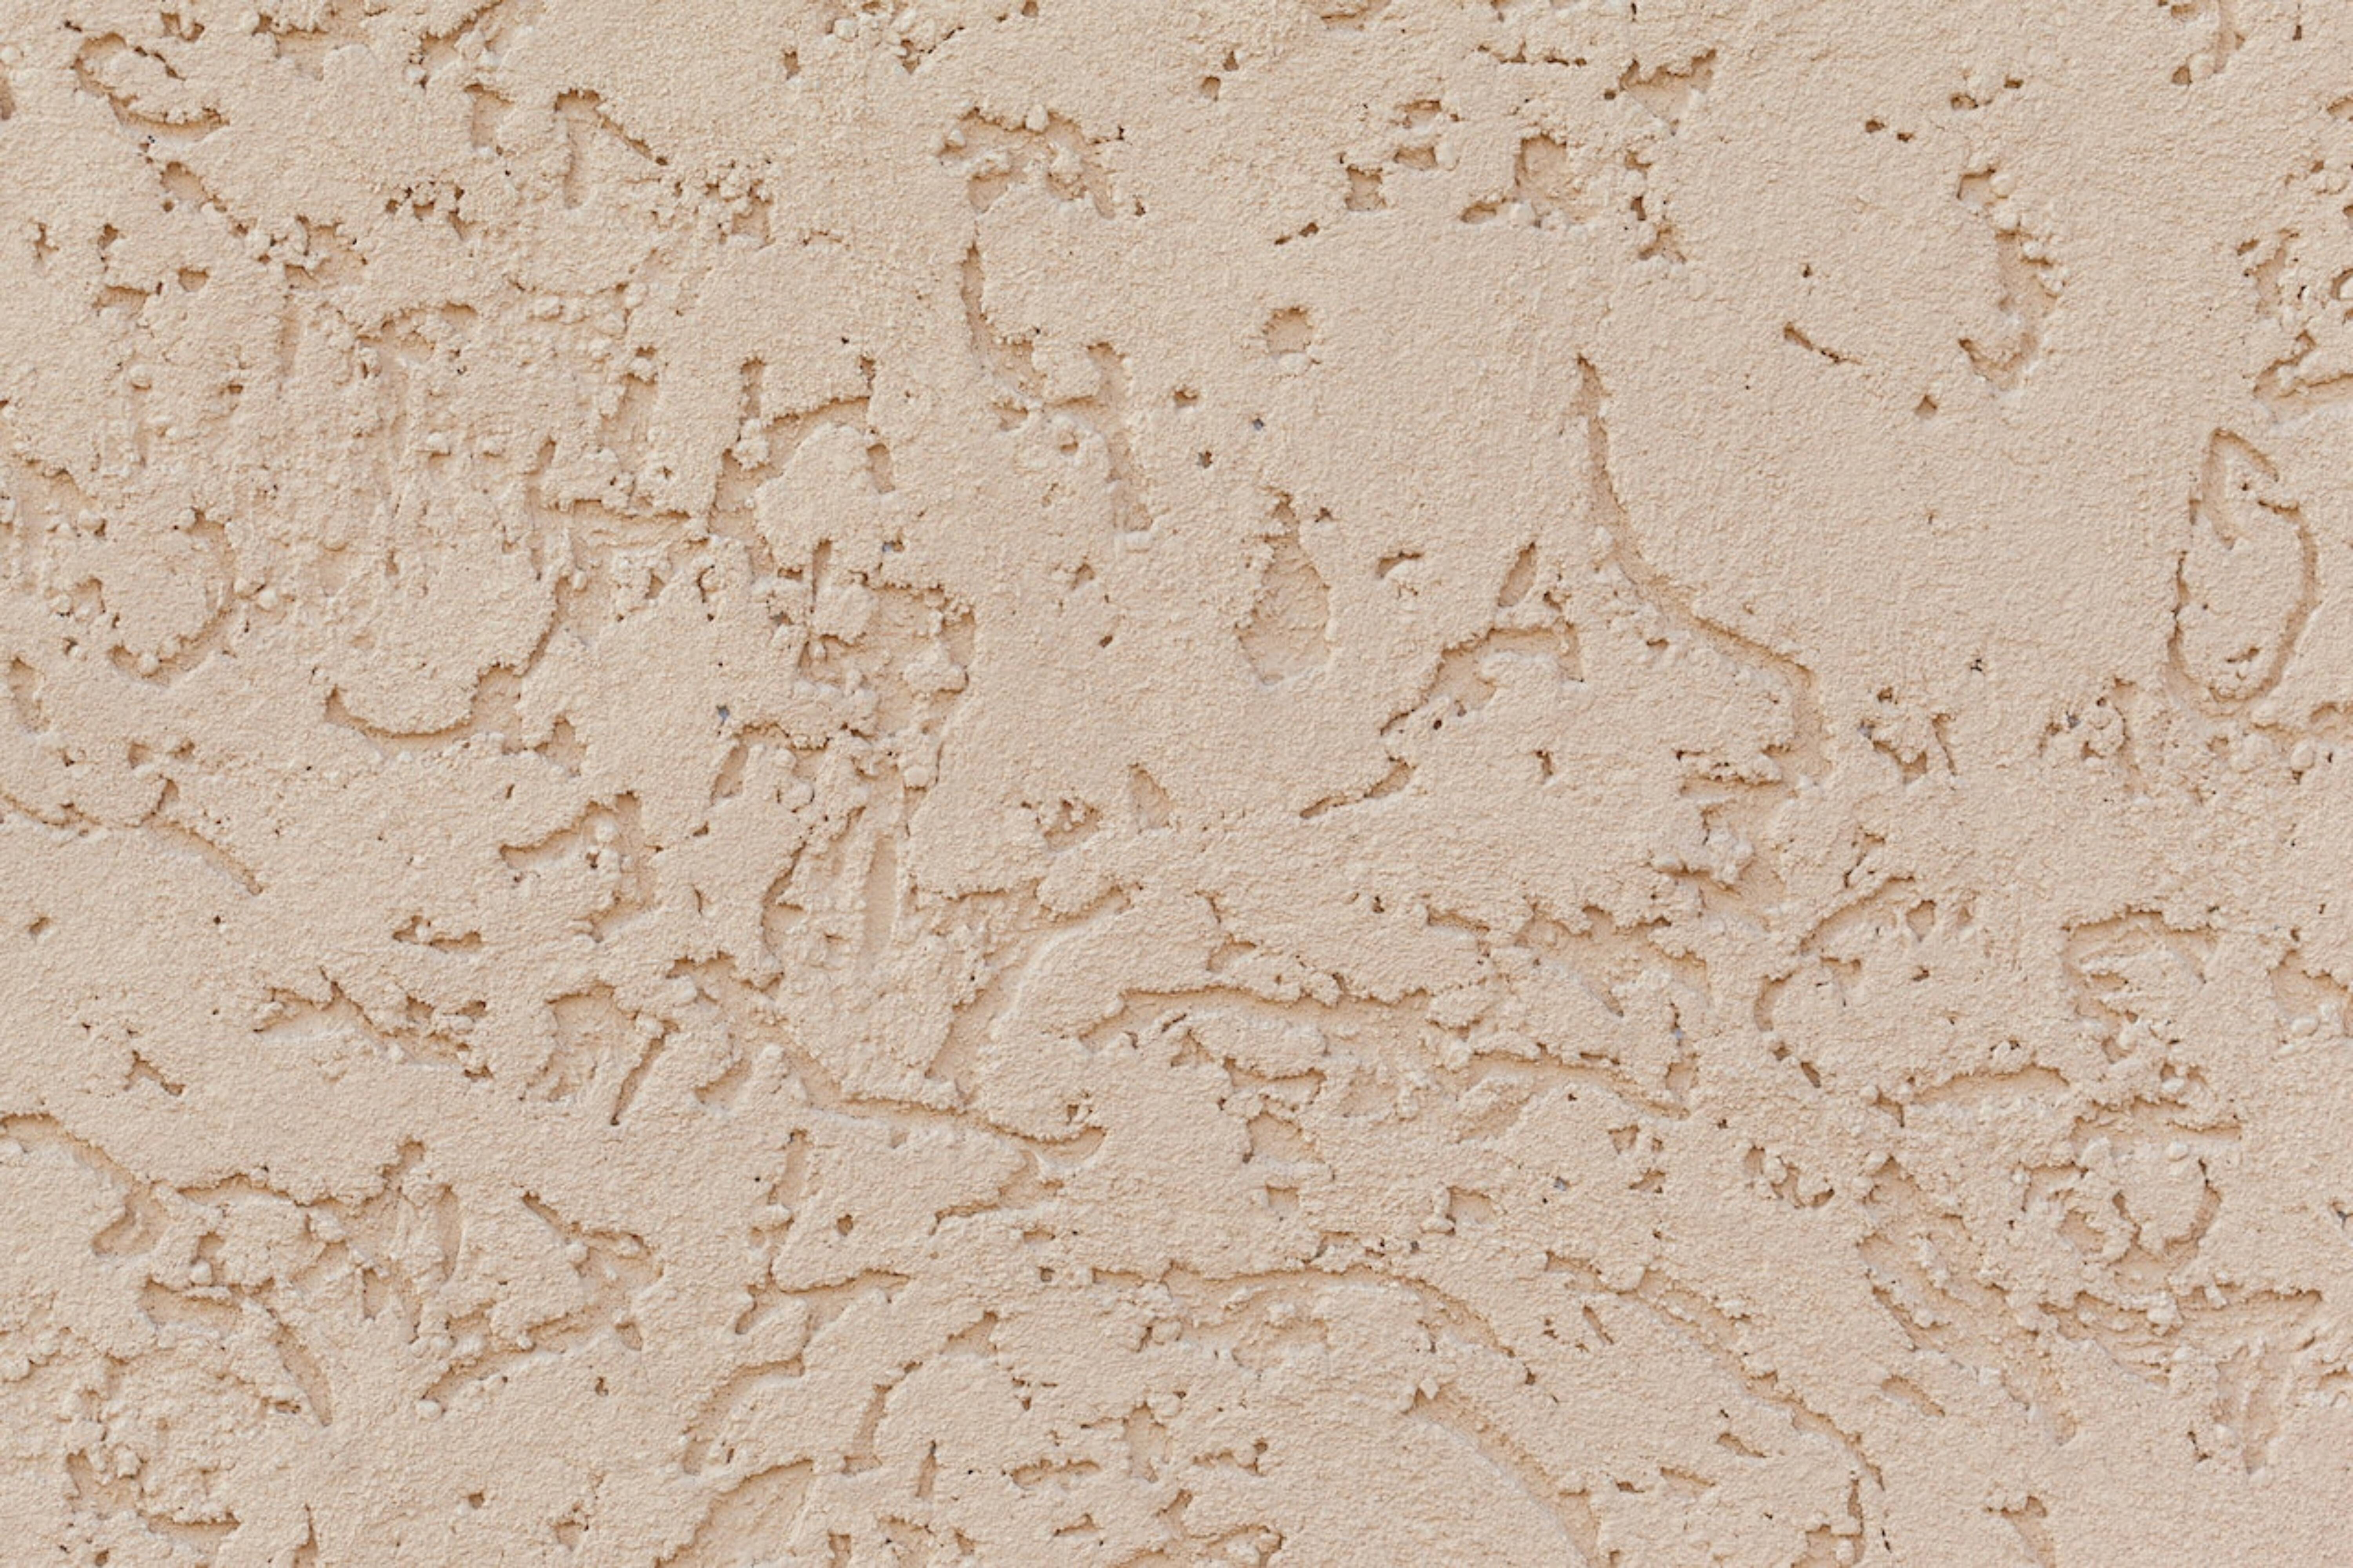 Close-up of a textured stucco wall.